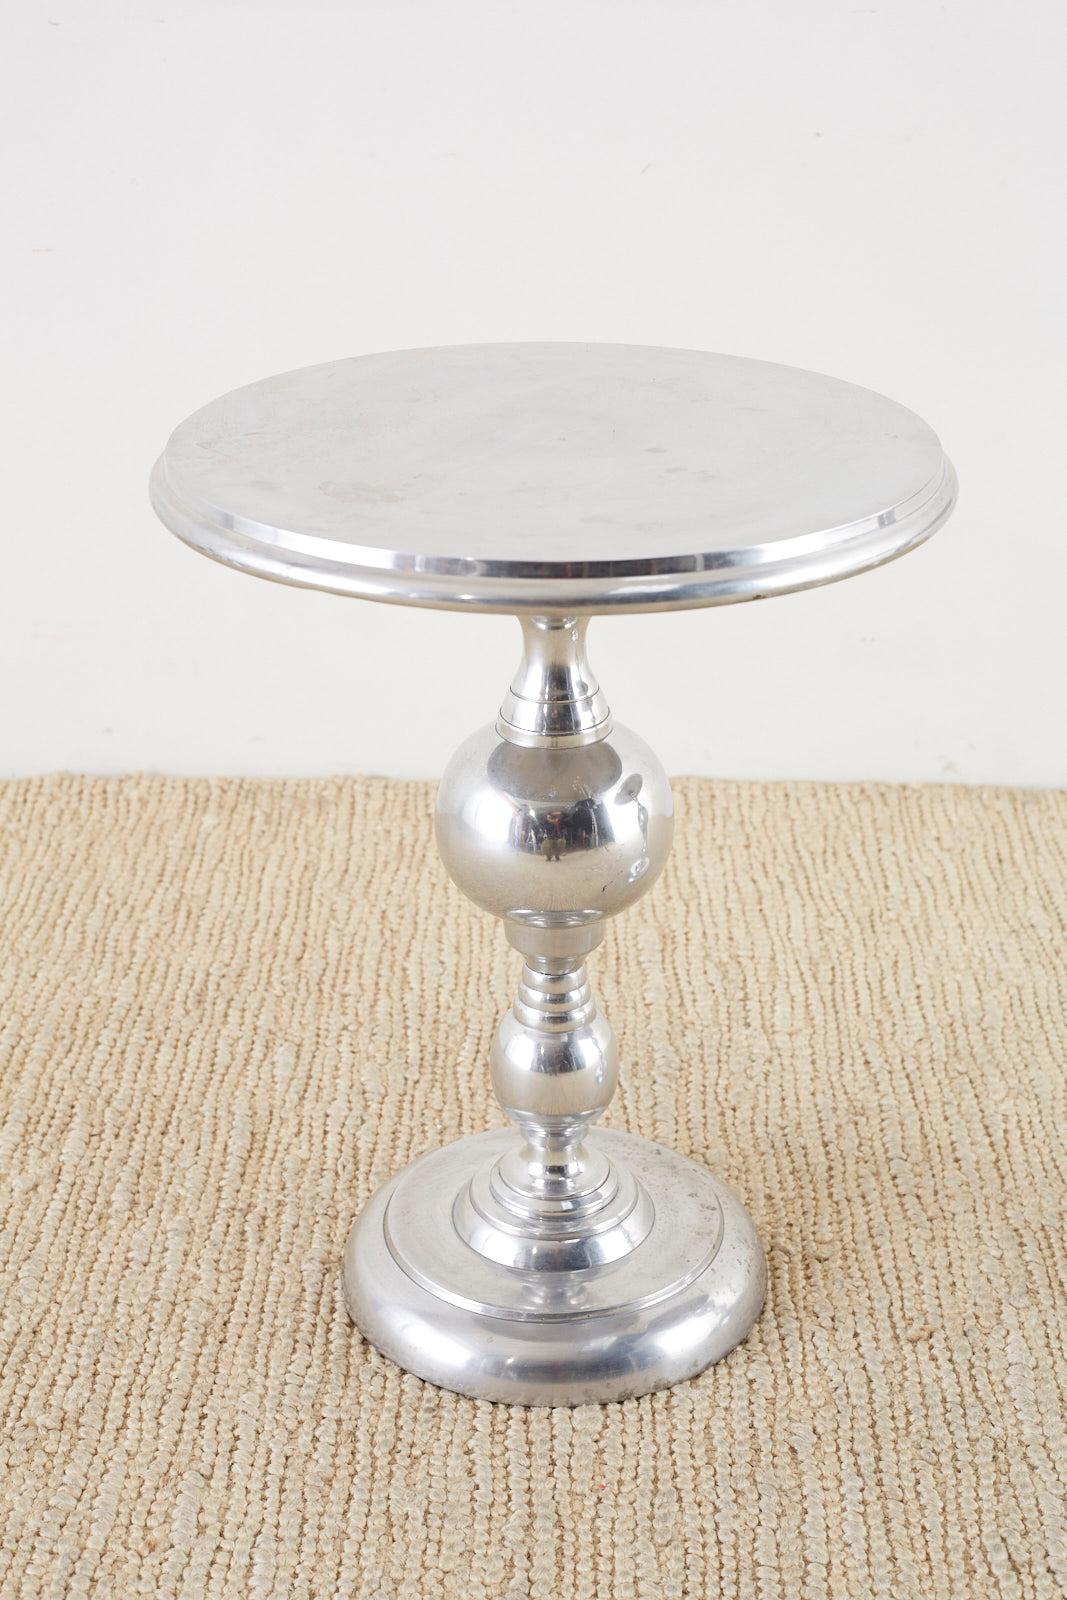 Sleek pair of round pedestal drink tables or side tables made of metal, probably aluminum. Featuring a turned style column pedestal mounted on a round base. The top has an ogee decorative edge and the tables have a polished finish with a vintage